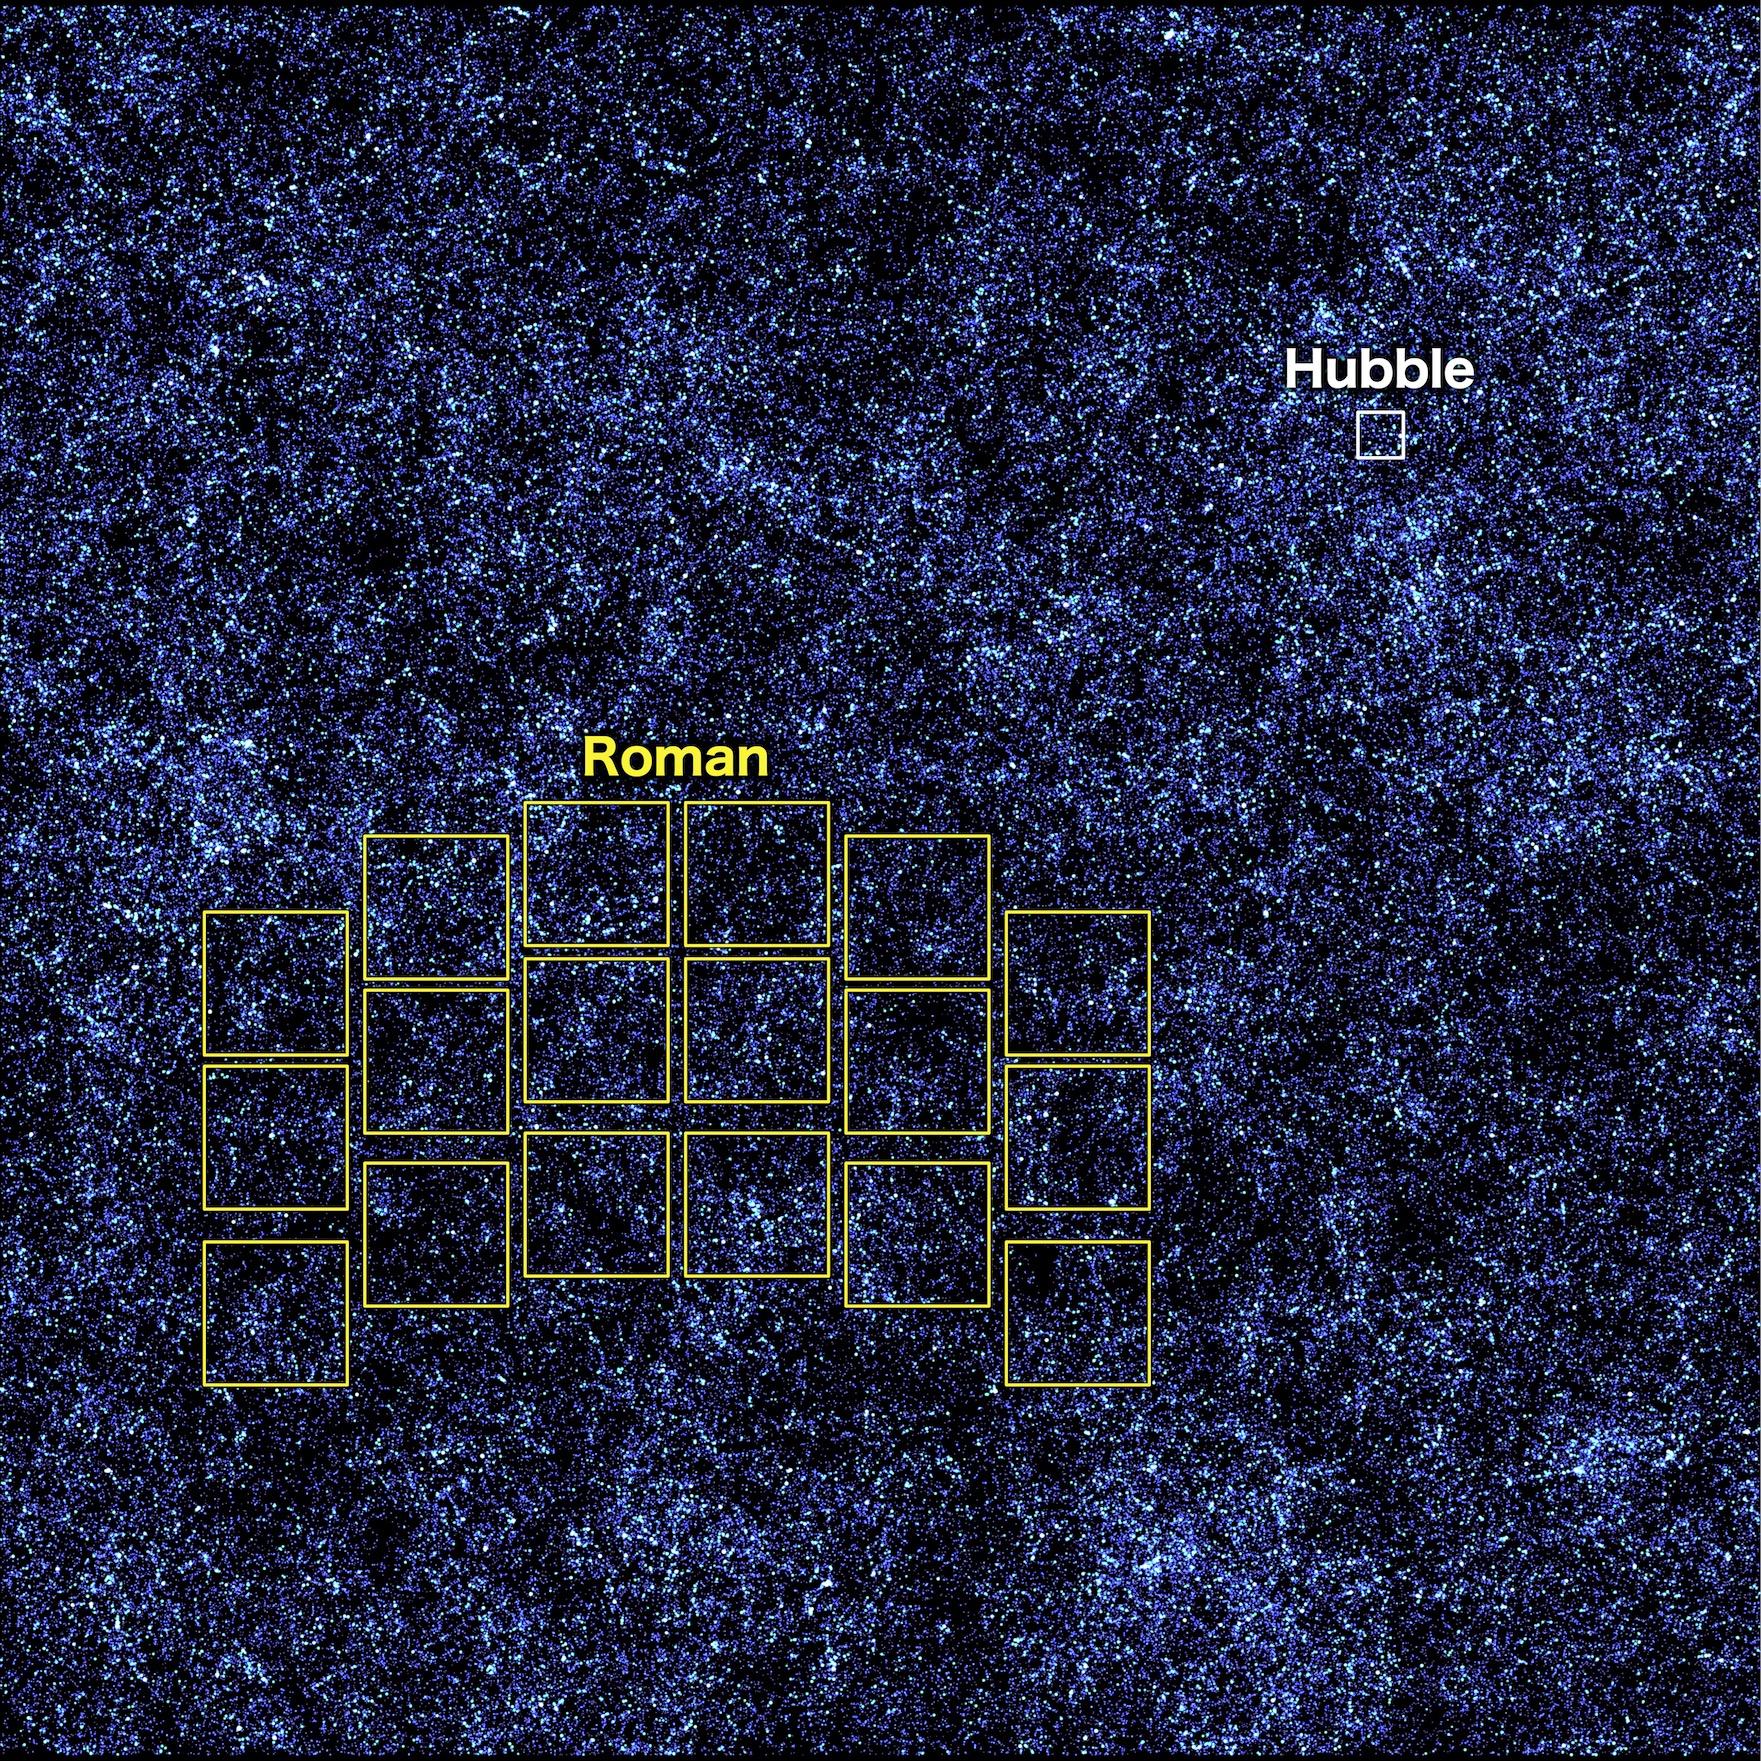 Comparison of the Roman telescope’s field of vision next to the Hubble telescope’s capabilities. Image courtesy of NASA's Goddard Space Flight Center/A. Yung